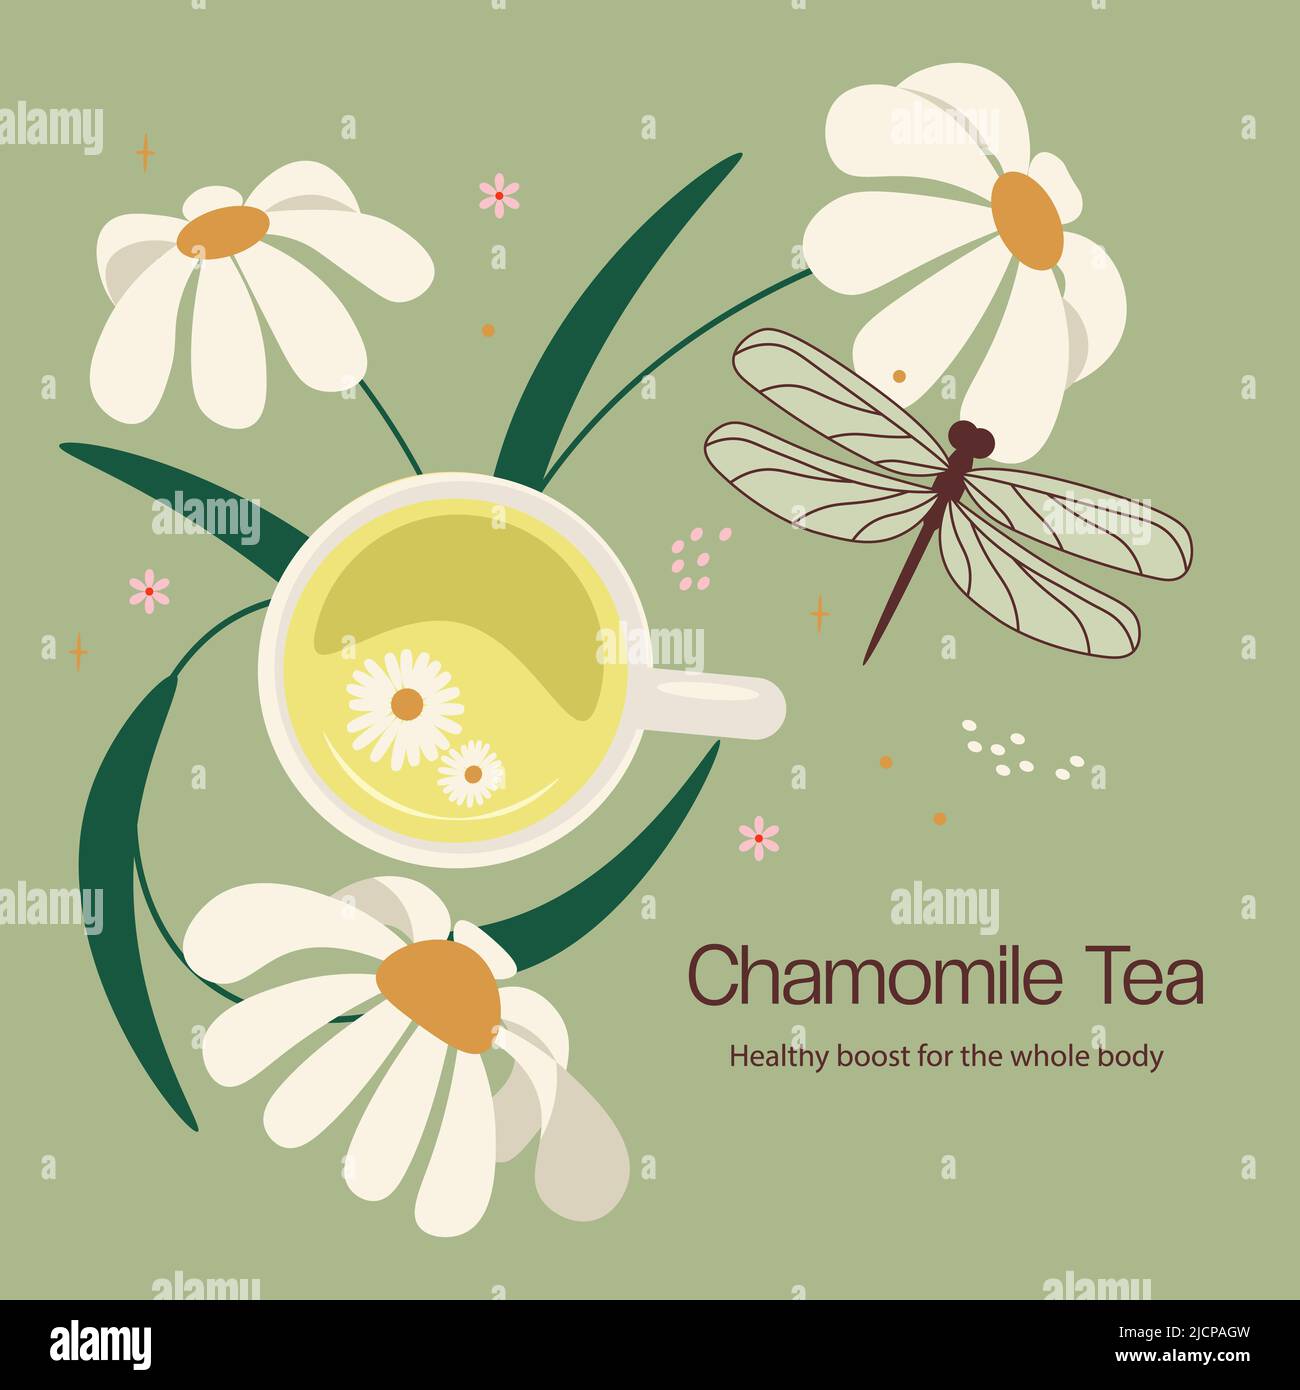 Mug of herbal tea among the chamomile flowers. Composition for tea packaging design. Suitable for tea shop, drinks menu, baking, candy and sweets, hea Stock Photo